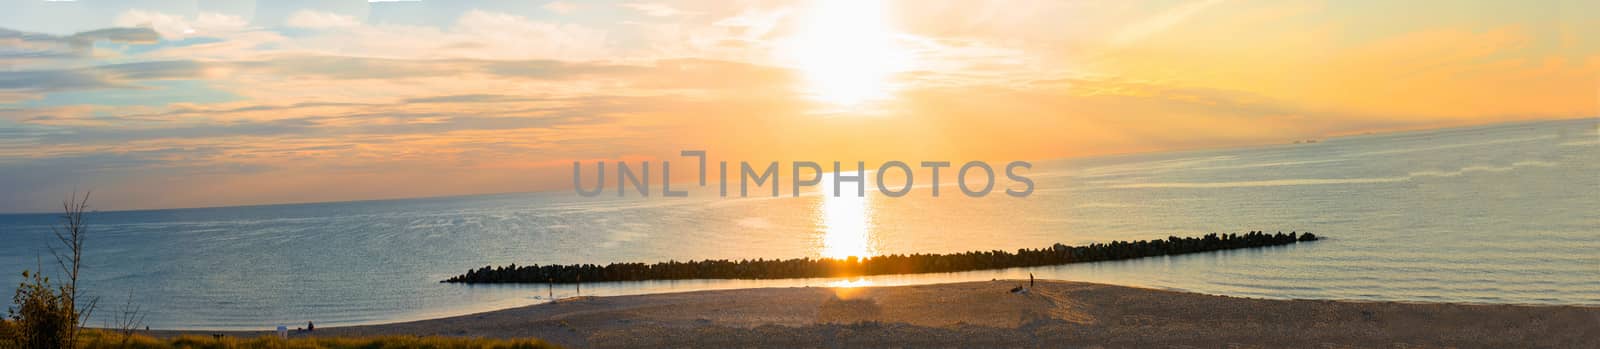 Panorama sunset on the beach            by JFsPic